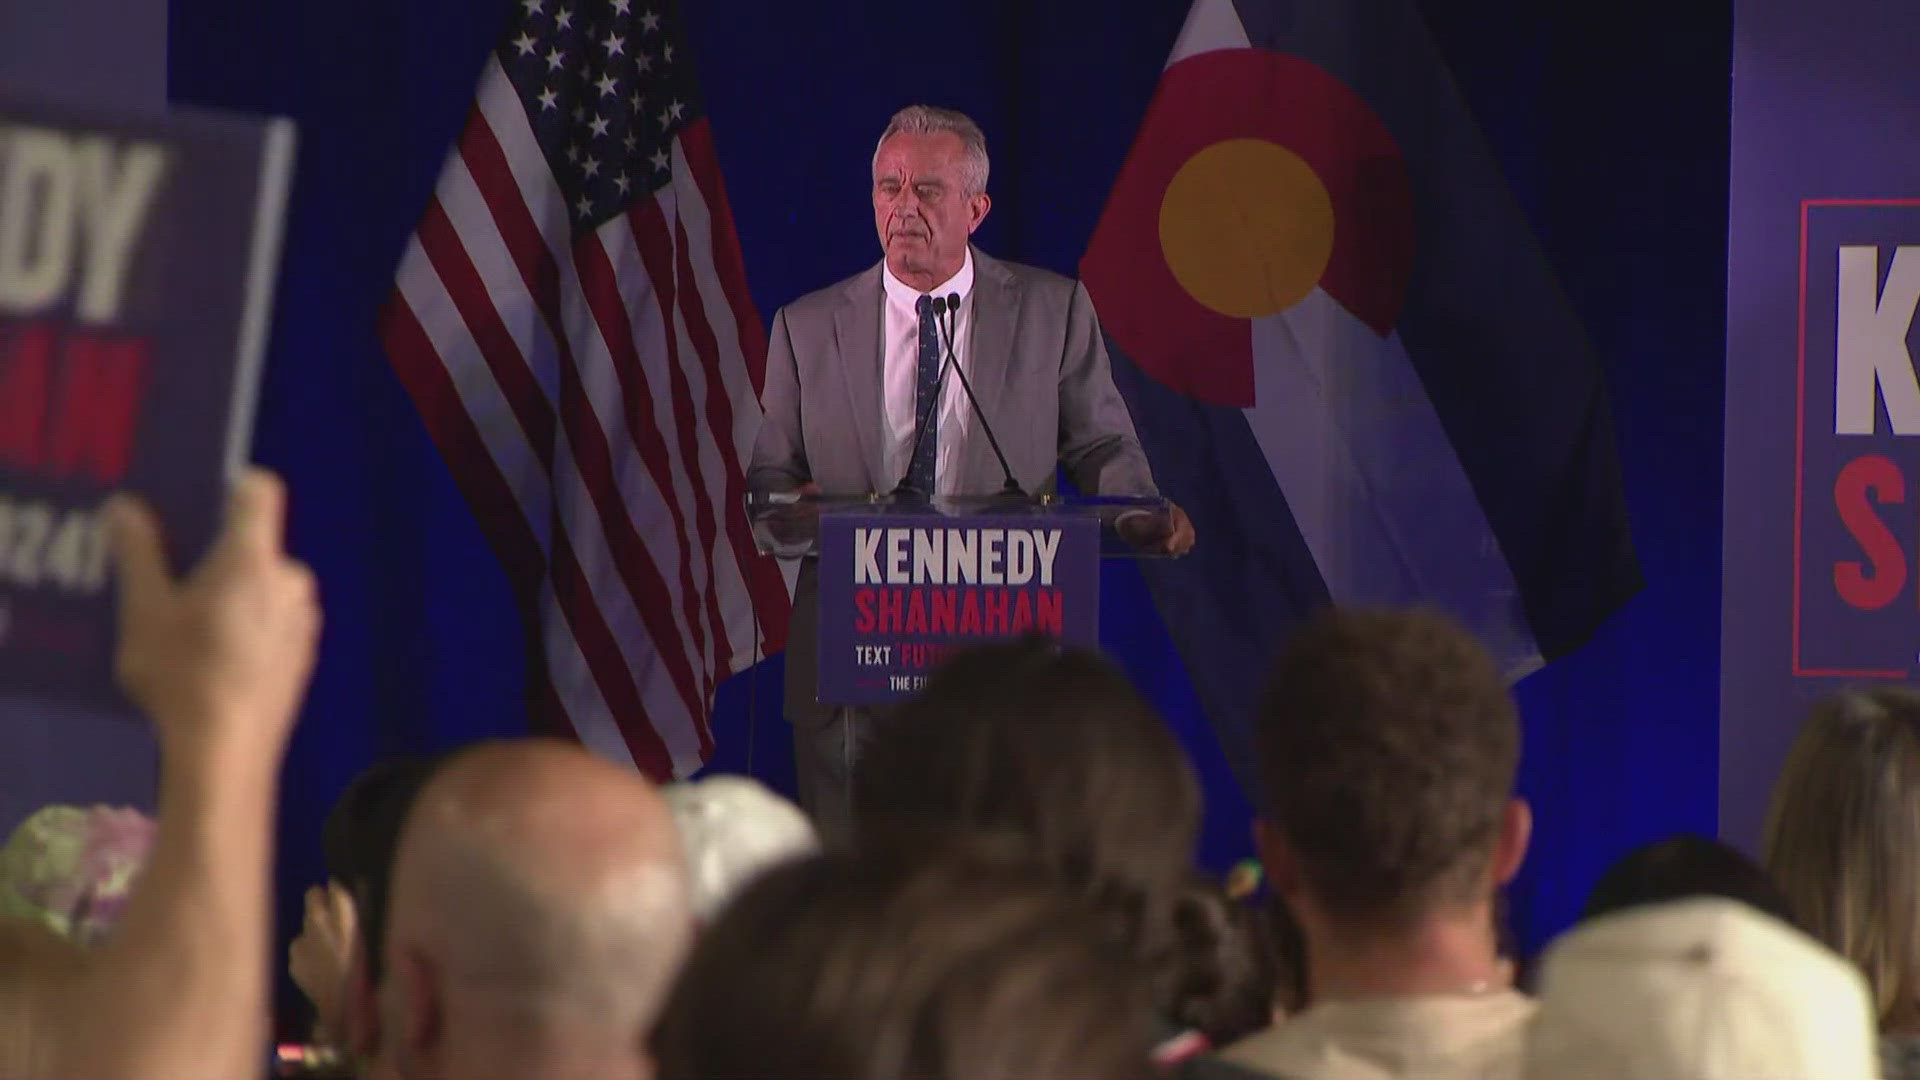 Historically, non-major party candidates have overperformed in Colorado. This year, independent Robert F. Kennedy Jr. is trying to do it, too.